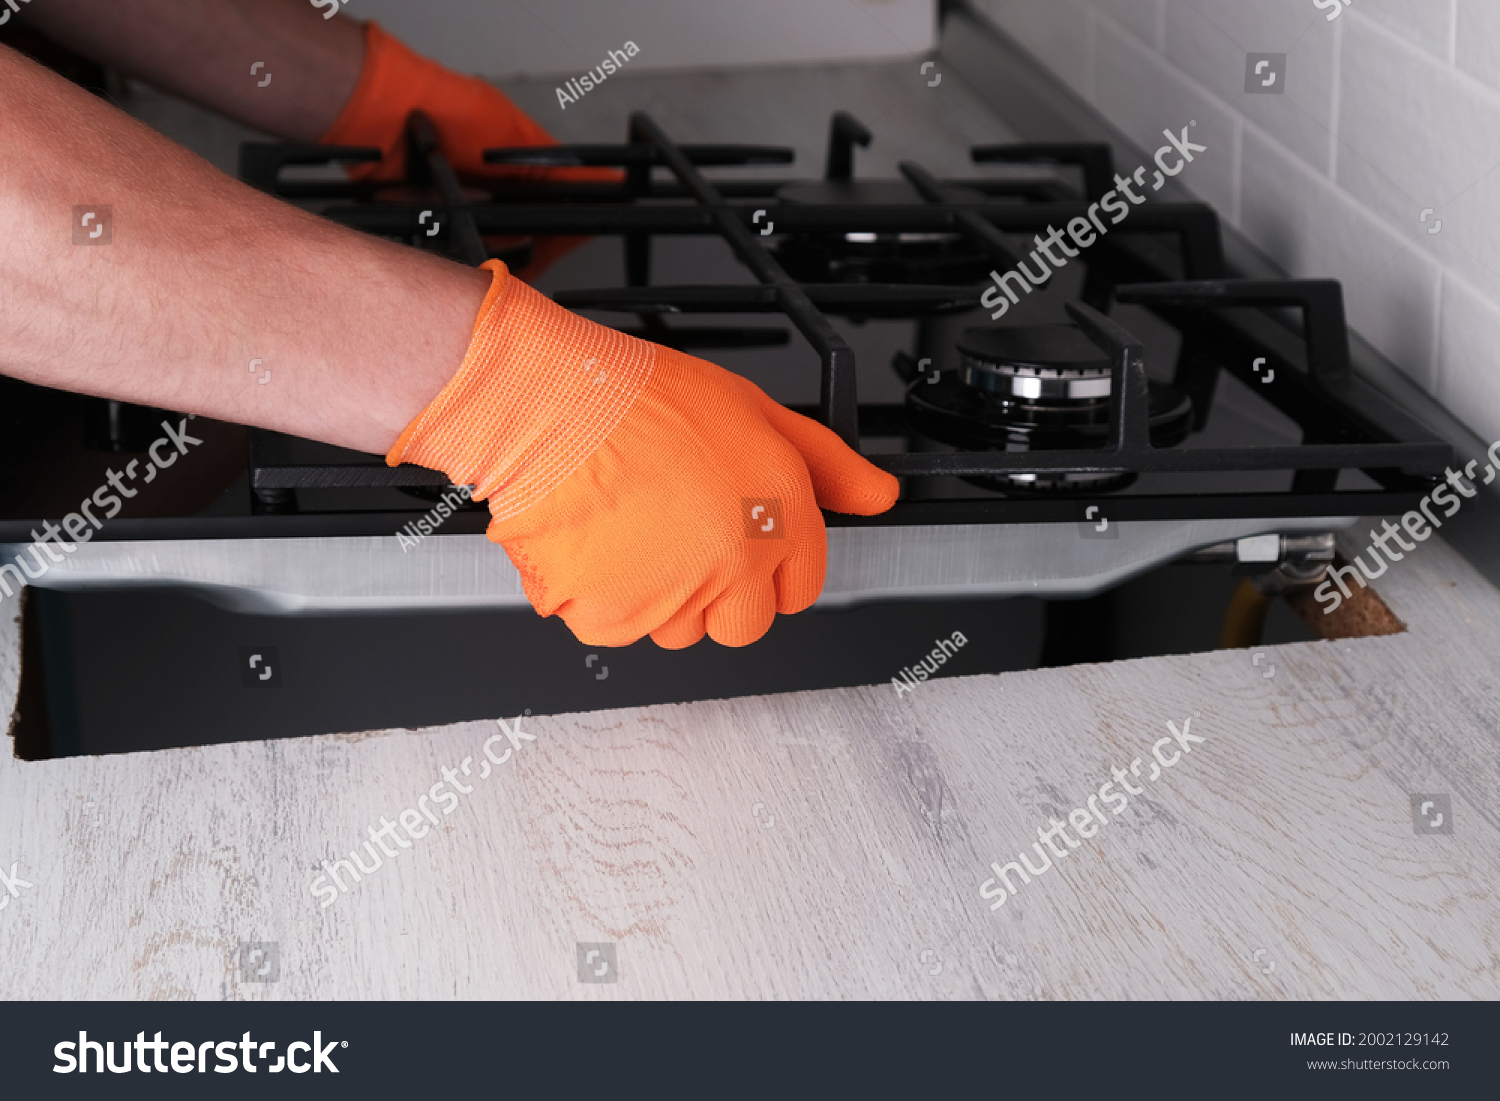 Stock Photo Installing Gas Hob In Kitchen Set Hands Of Master Close Up 2002129142 